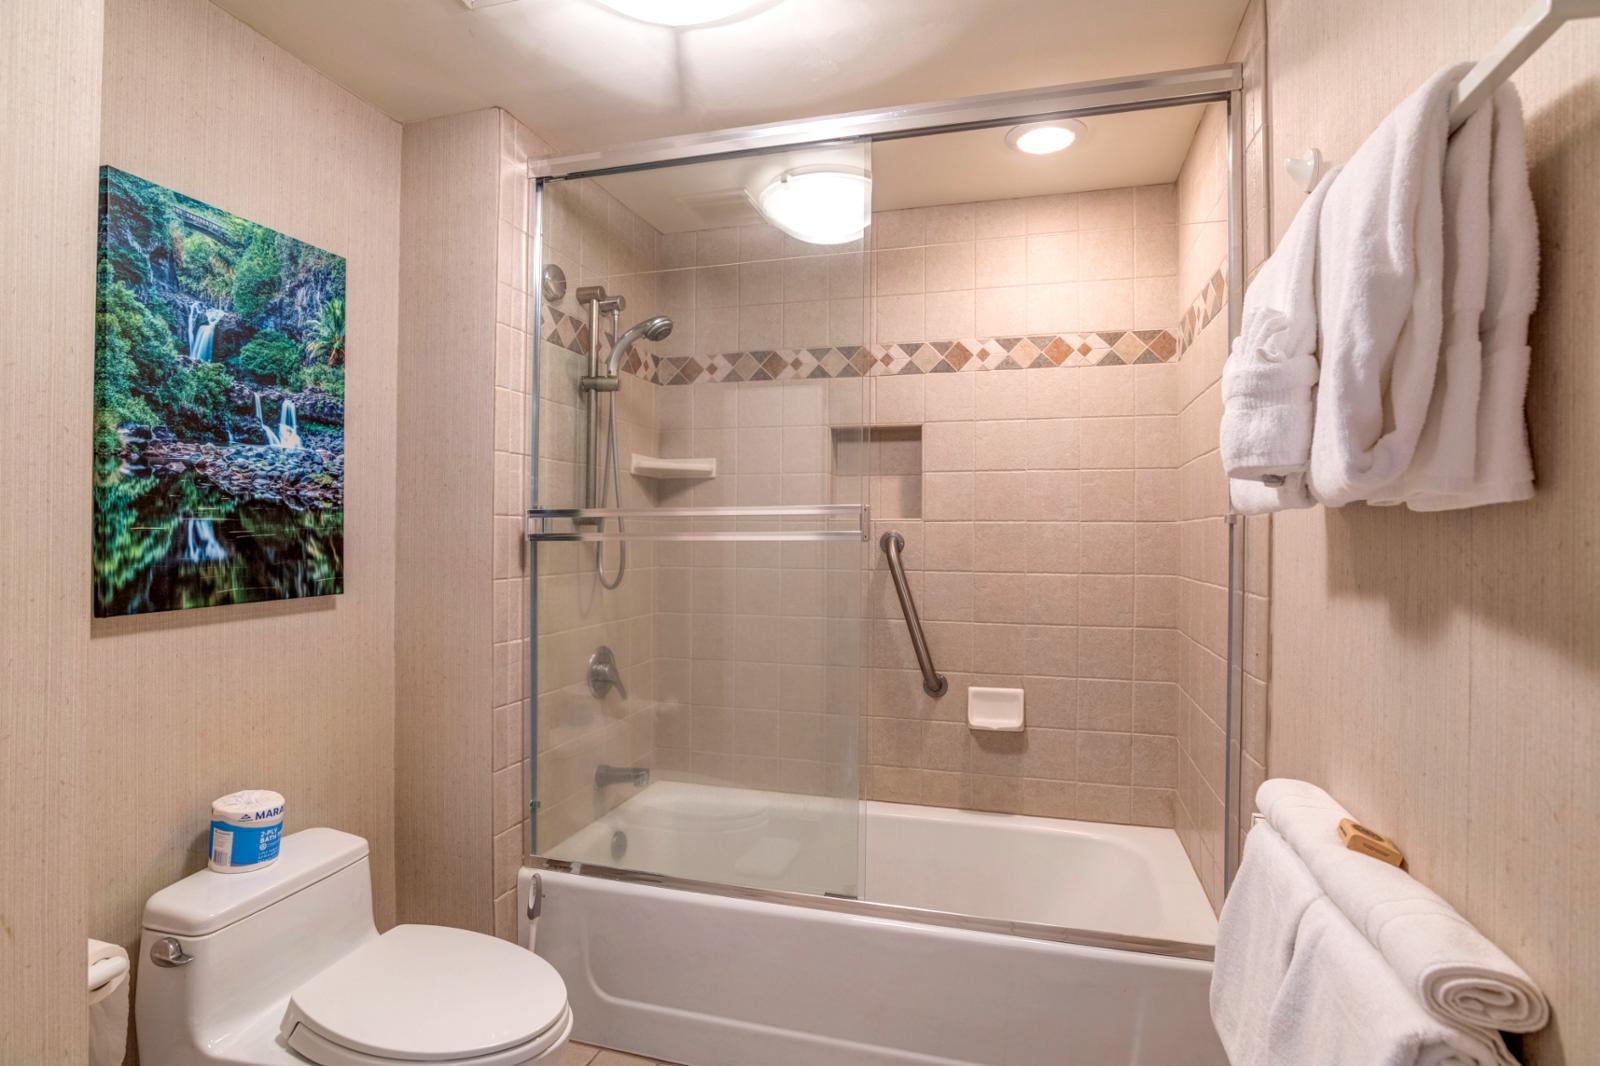 Shower/tub combination, perfect for families!